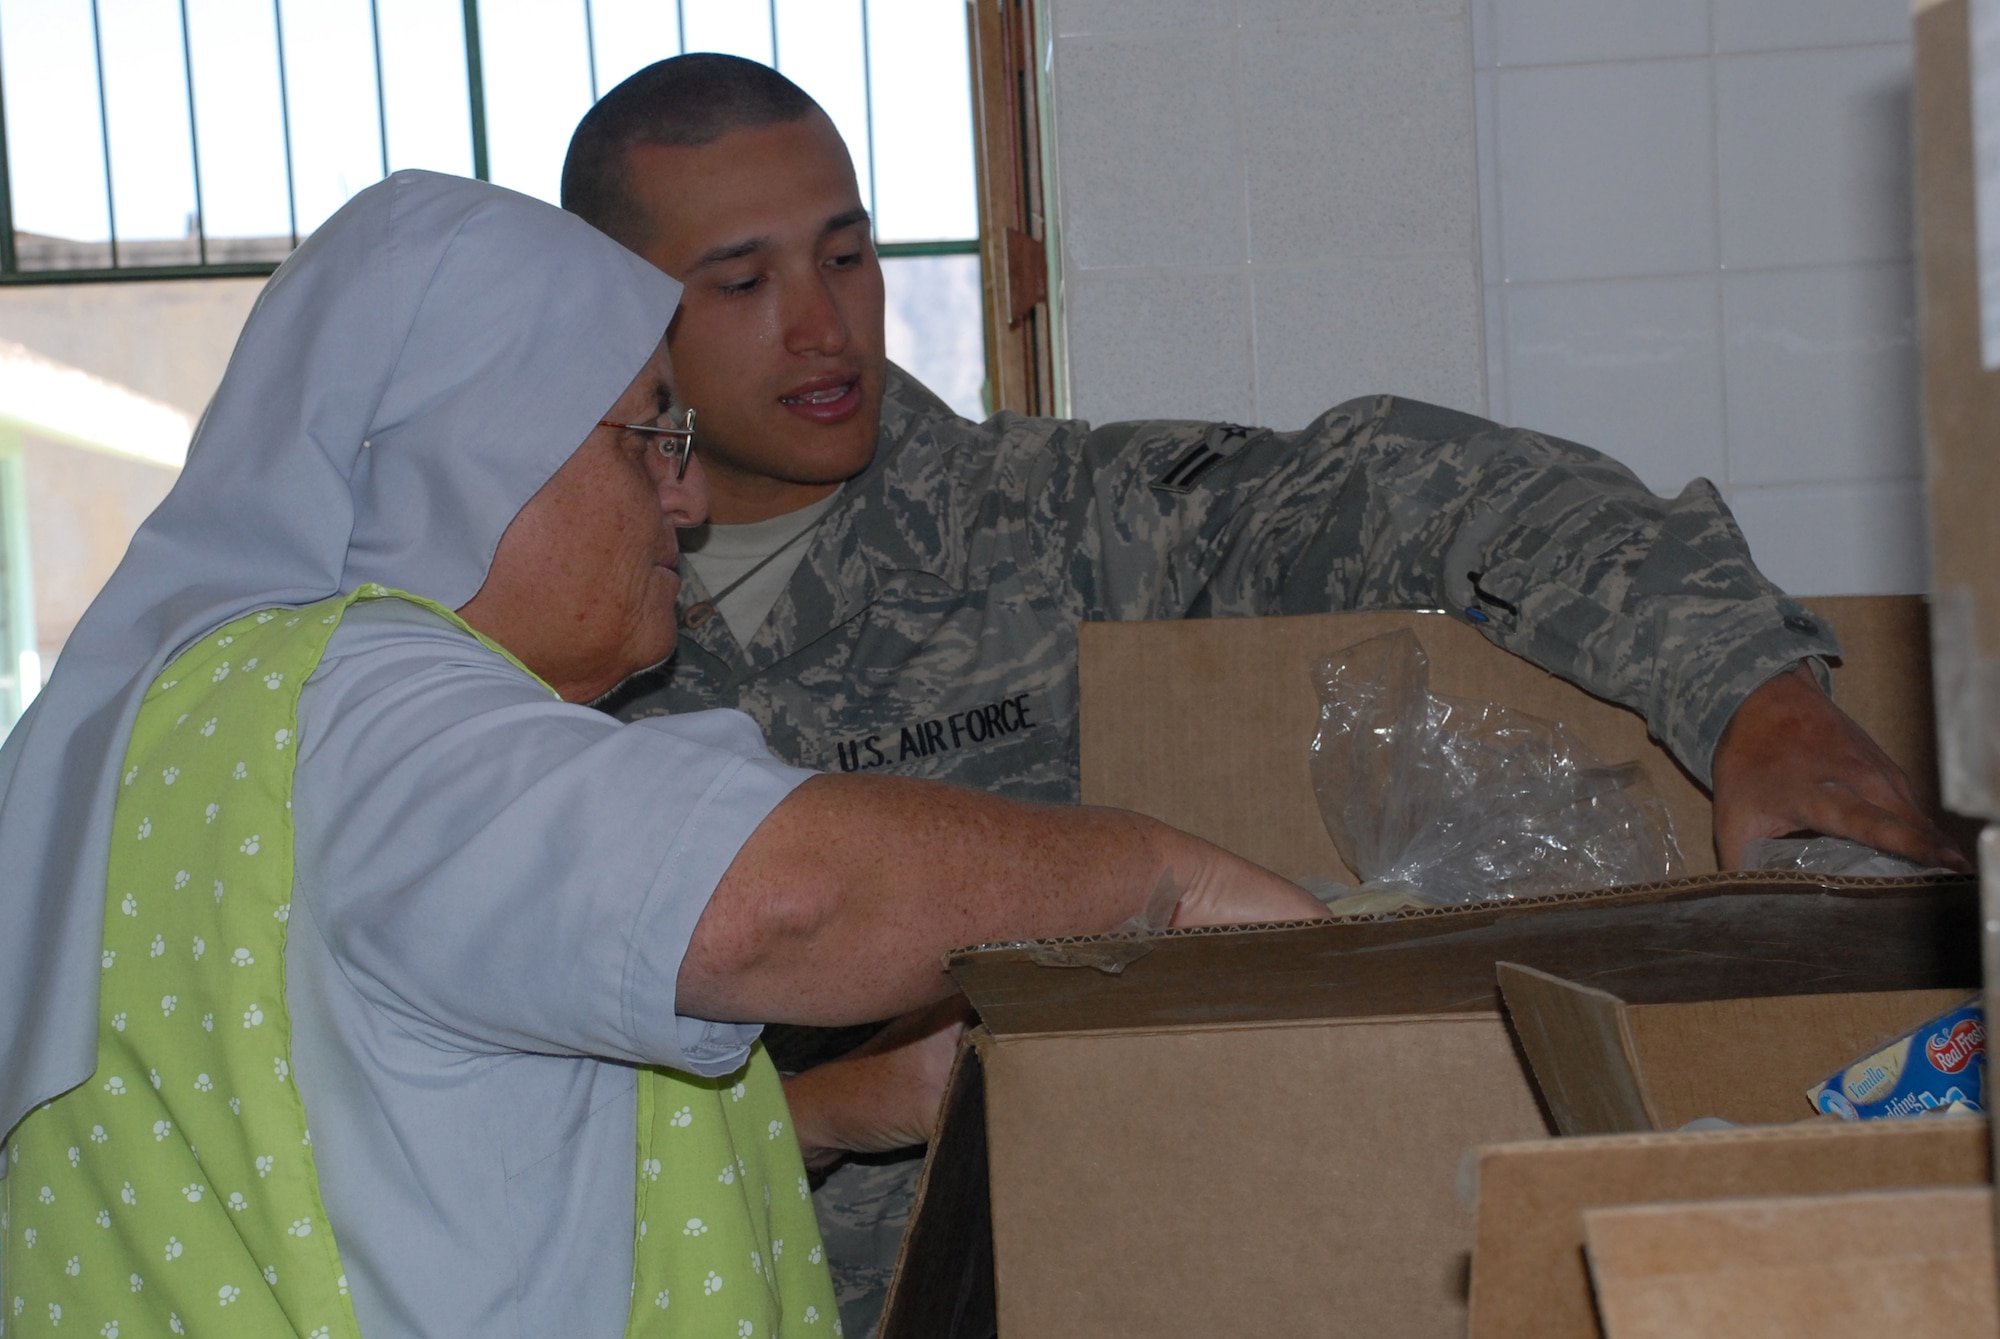 Airman 1st Class George Monroe, deployed from Tinker Air Force Base, Okla., shows Sister Amanda Delgado the types of food donated by U.S. servicemembers, June 9, to Juan Andres Vivanco Amorin, a children’s orphanage in Ayacucho, Peru. The orphanage houses 180 boys and girls who will be affected by the support given to New Horizons Peru 2008, a Peruvian and U.S. partnered effort to build schools, clinics, and wells for the Peruvian people. (U.S. Air Force photo/Airman 1st Class Tracie Forte)